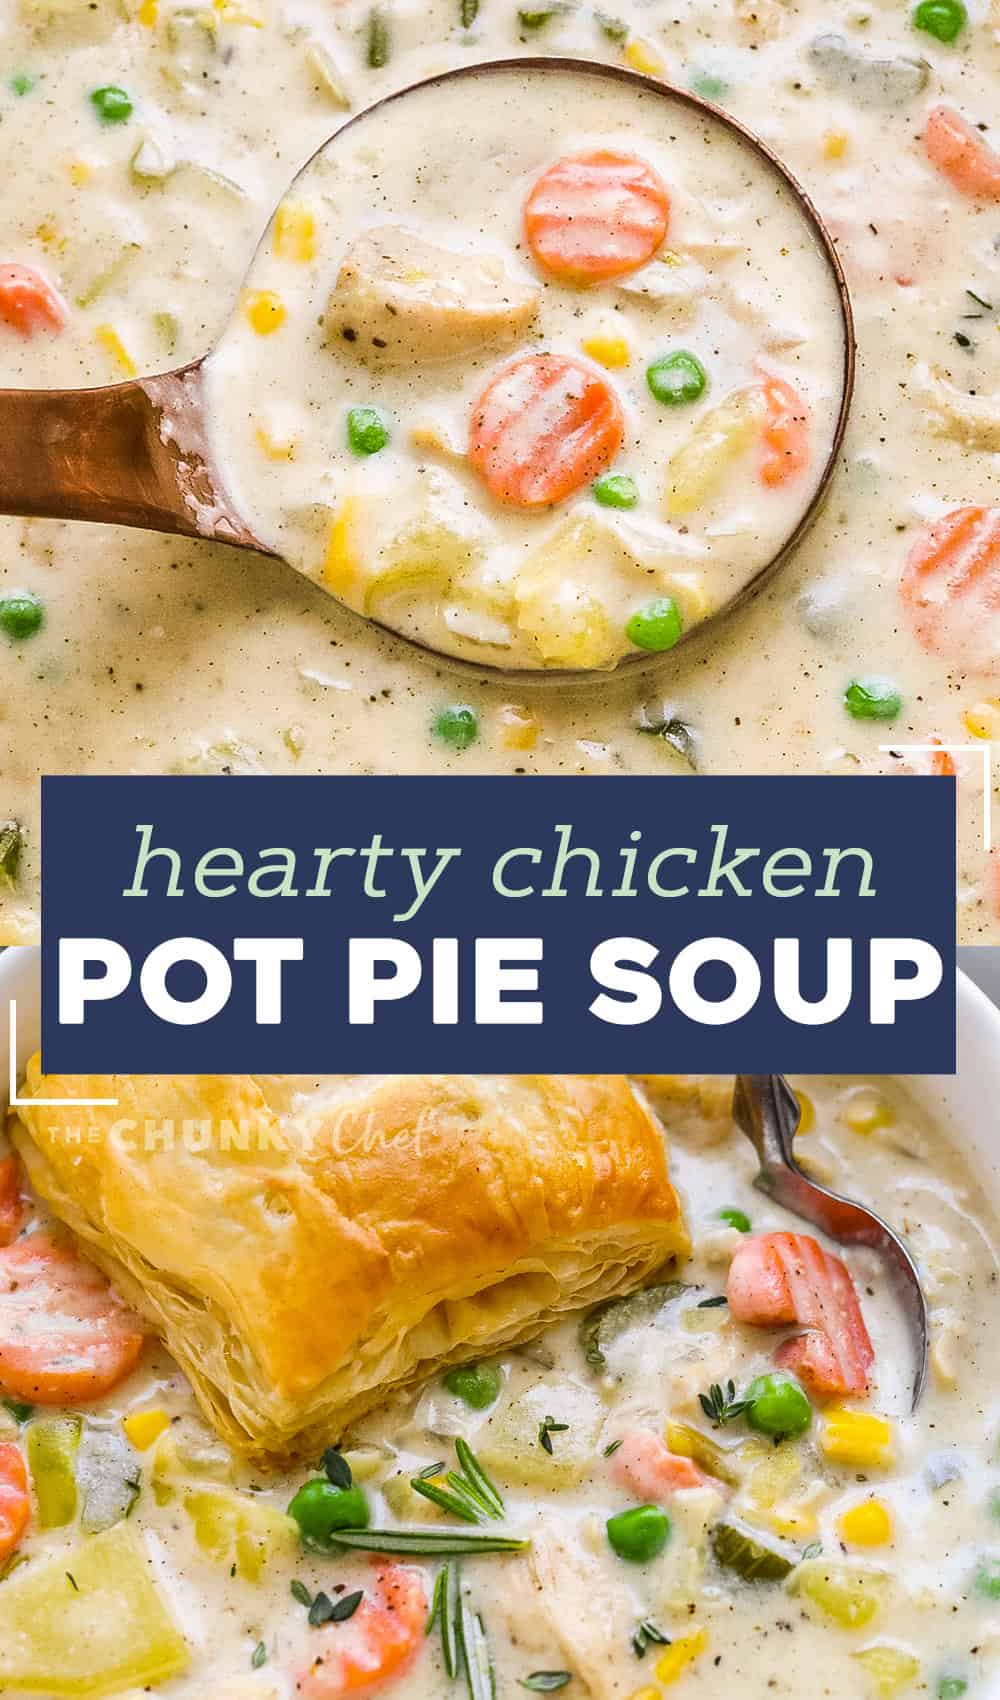 Creamy Chicken Pot Pie Soup - The Chunky Chef